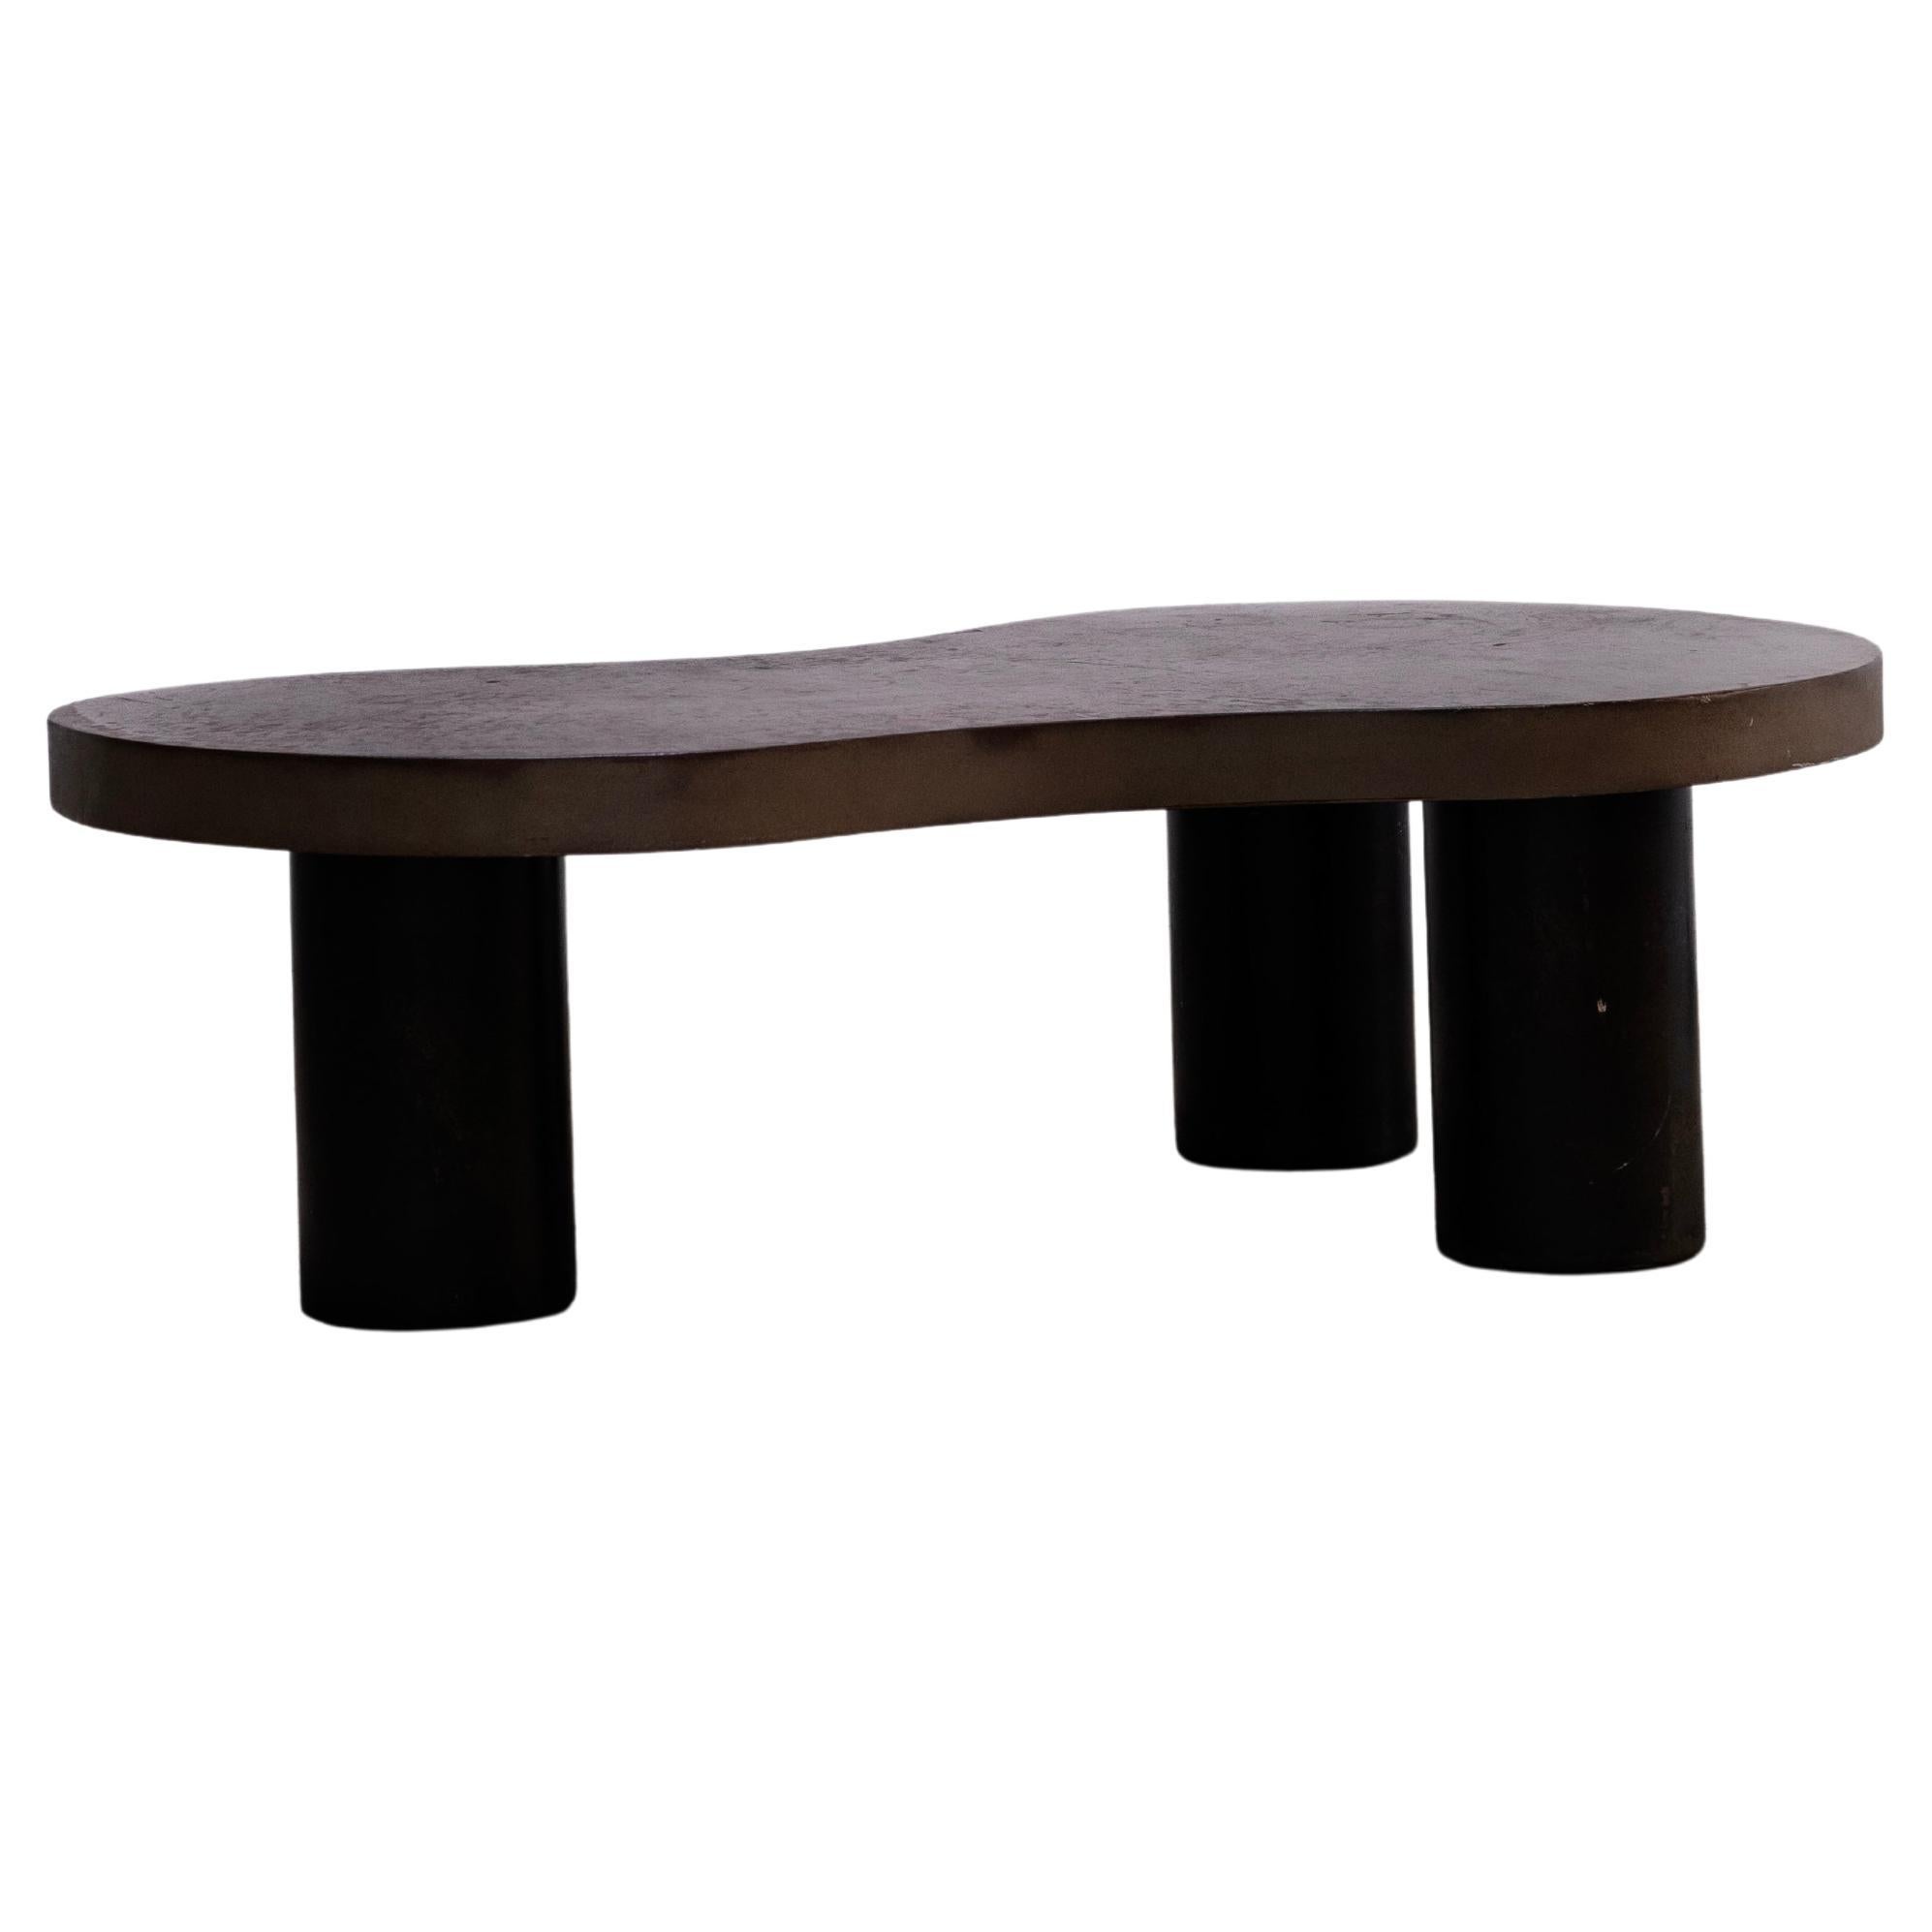 Designer's Flaque Coffee Table For Sale